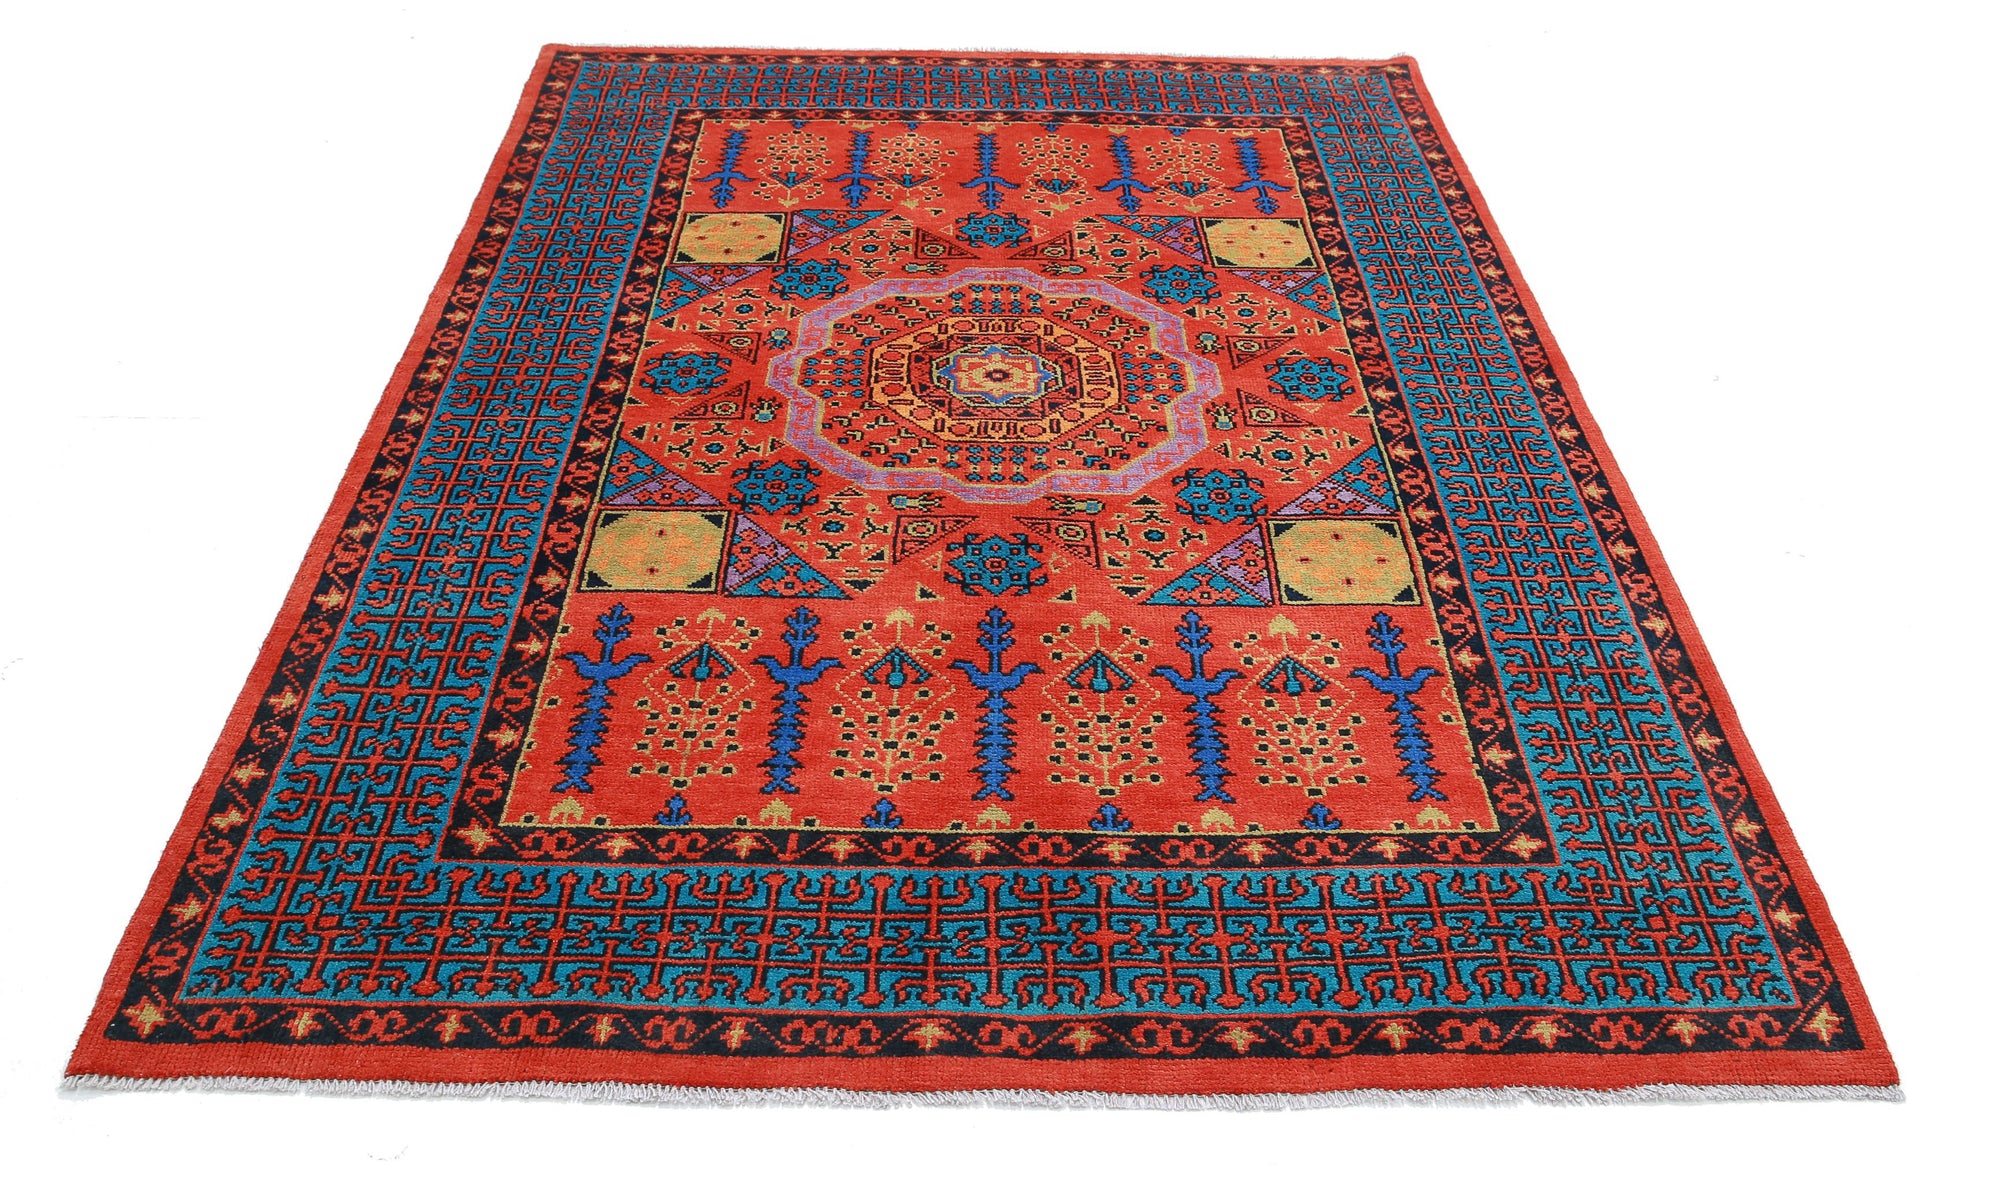 Revival-hand-knotted-qarghani-wool-rug-5014090-3.jpg